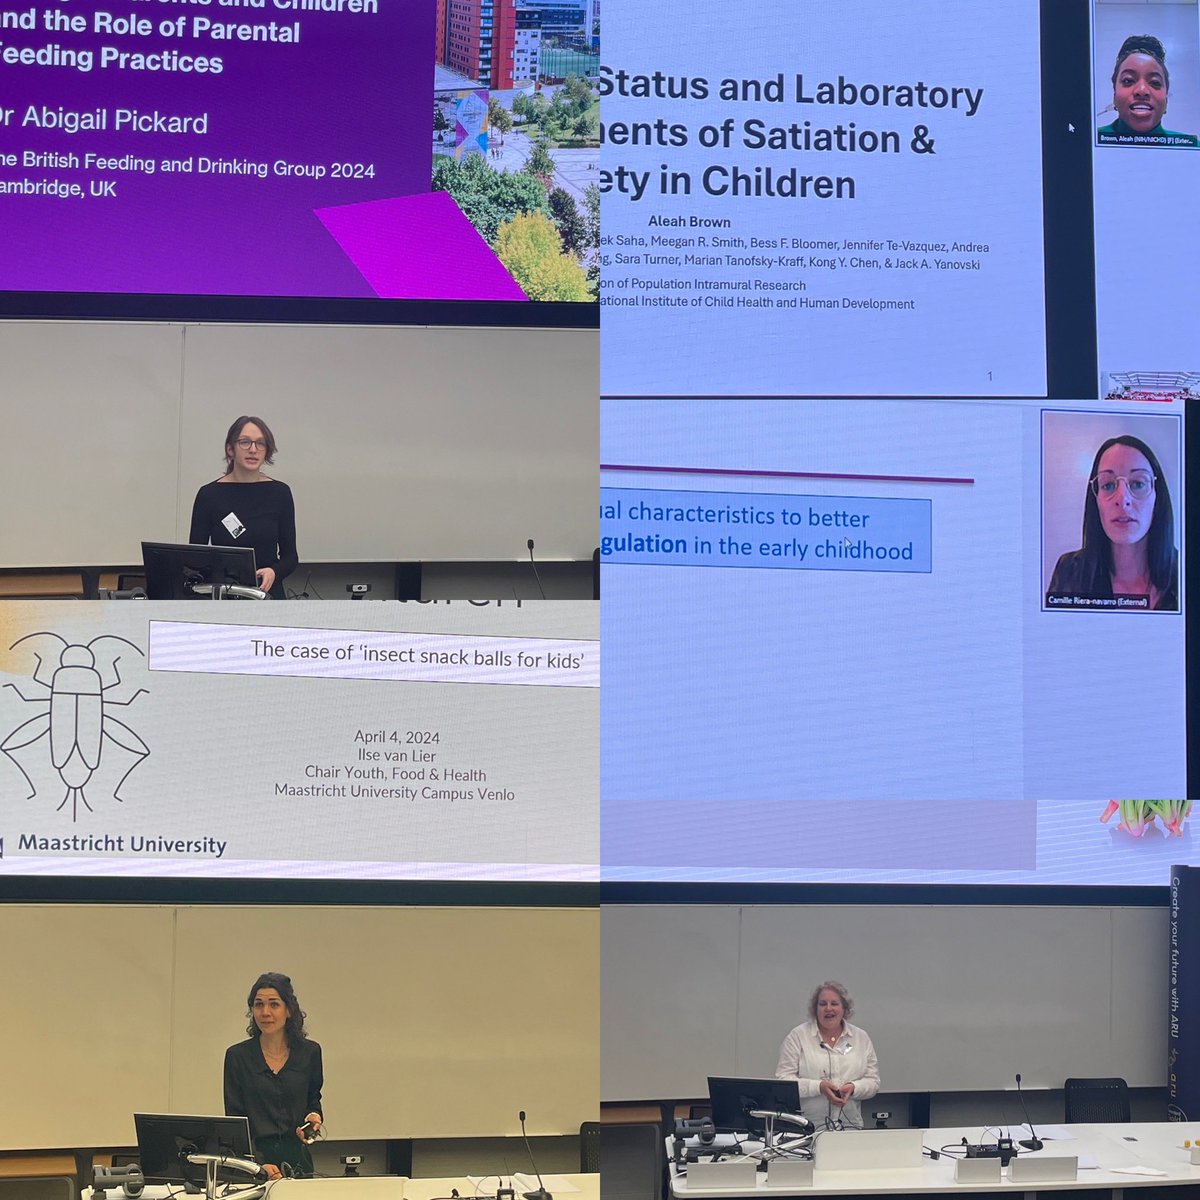 The first day of #BFDG2024 is ending with a lovely session on Eating Behaviour in Childhood by presentations of Aleah Brown, @AbigailPickard6 @rn_camille @ilsevanlier @natjelli 👧🏼 Thank you all!